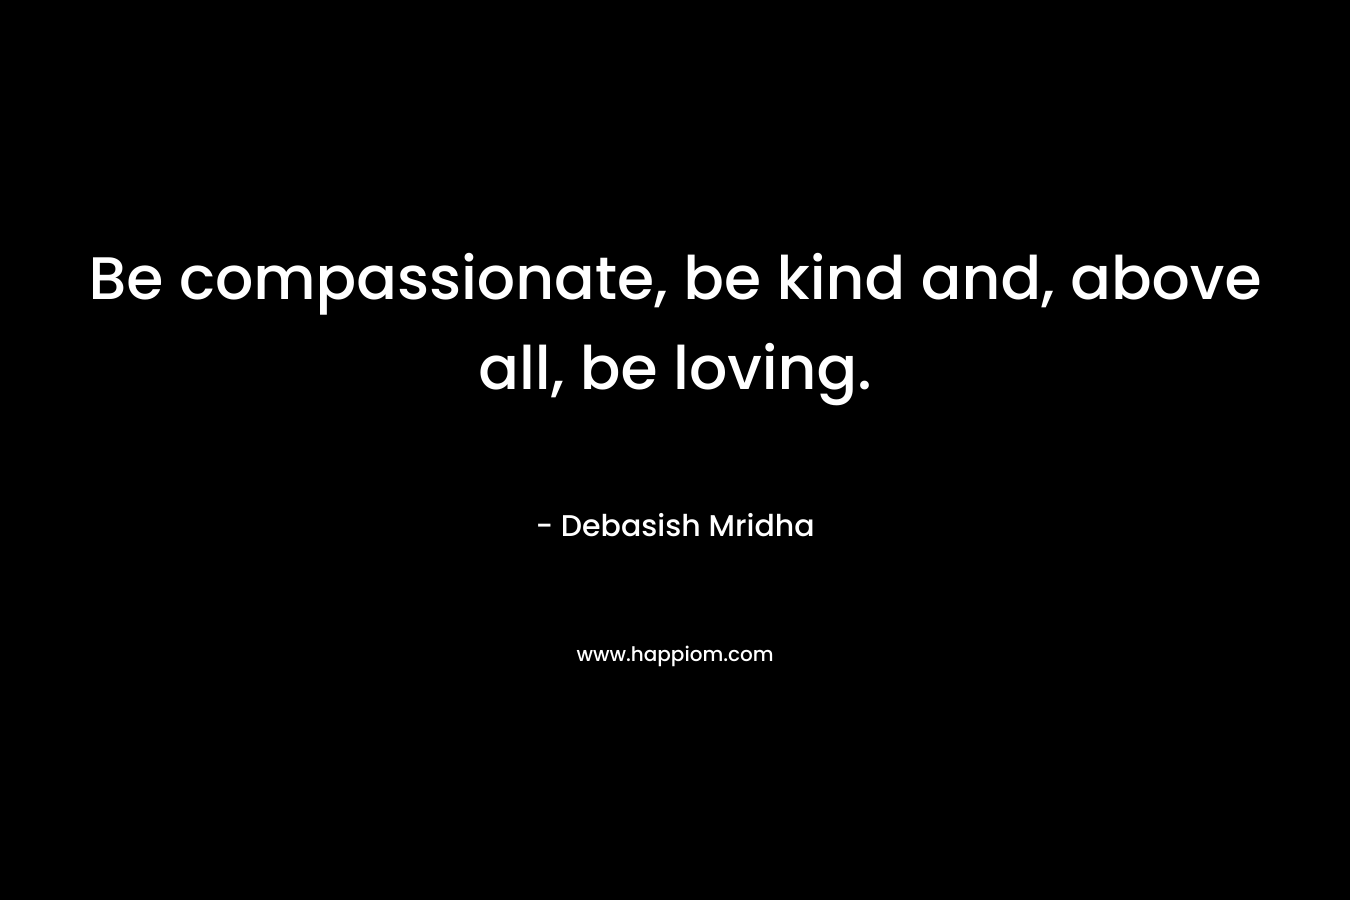 Be compassionate, be kind and, above all, be loving.